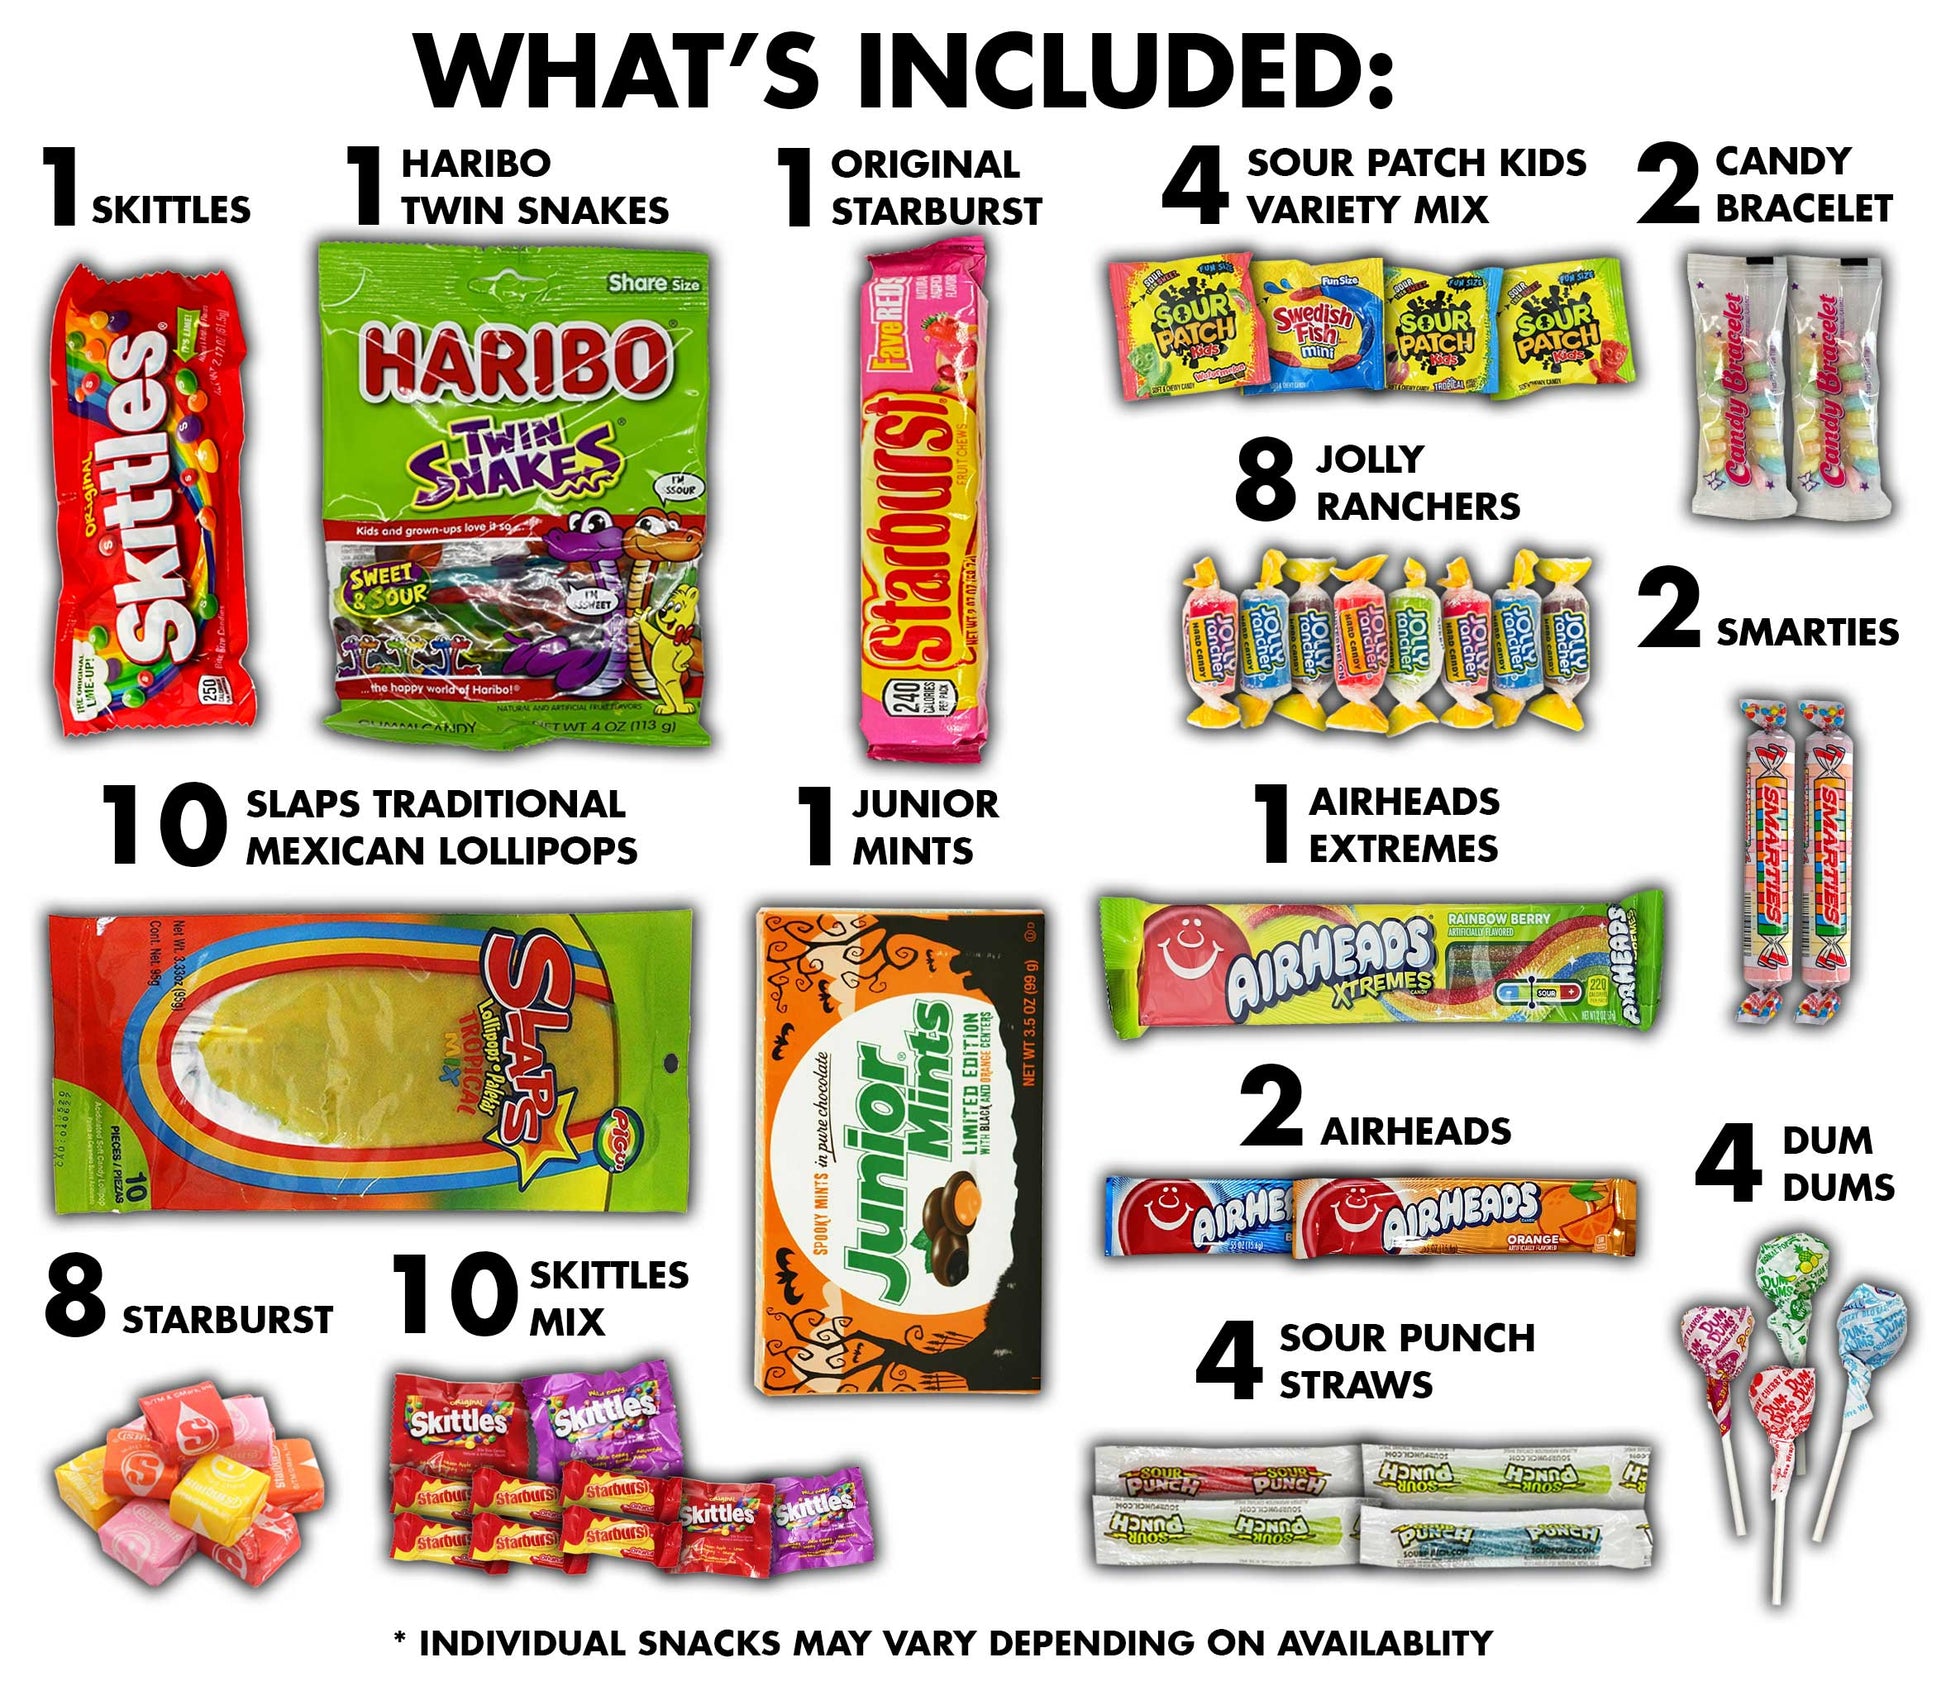 Included is skittles, haribo, starburst, sour patch, jolly ranchers, mexican lollipops, jr mints, sour punch airheads extremes, dum dums,